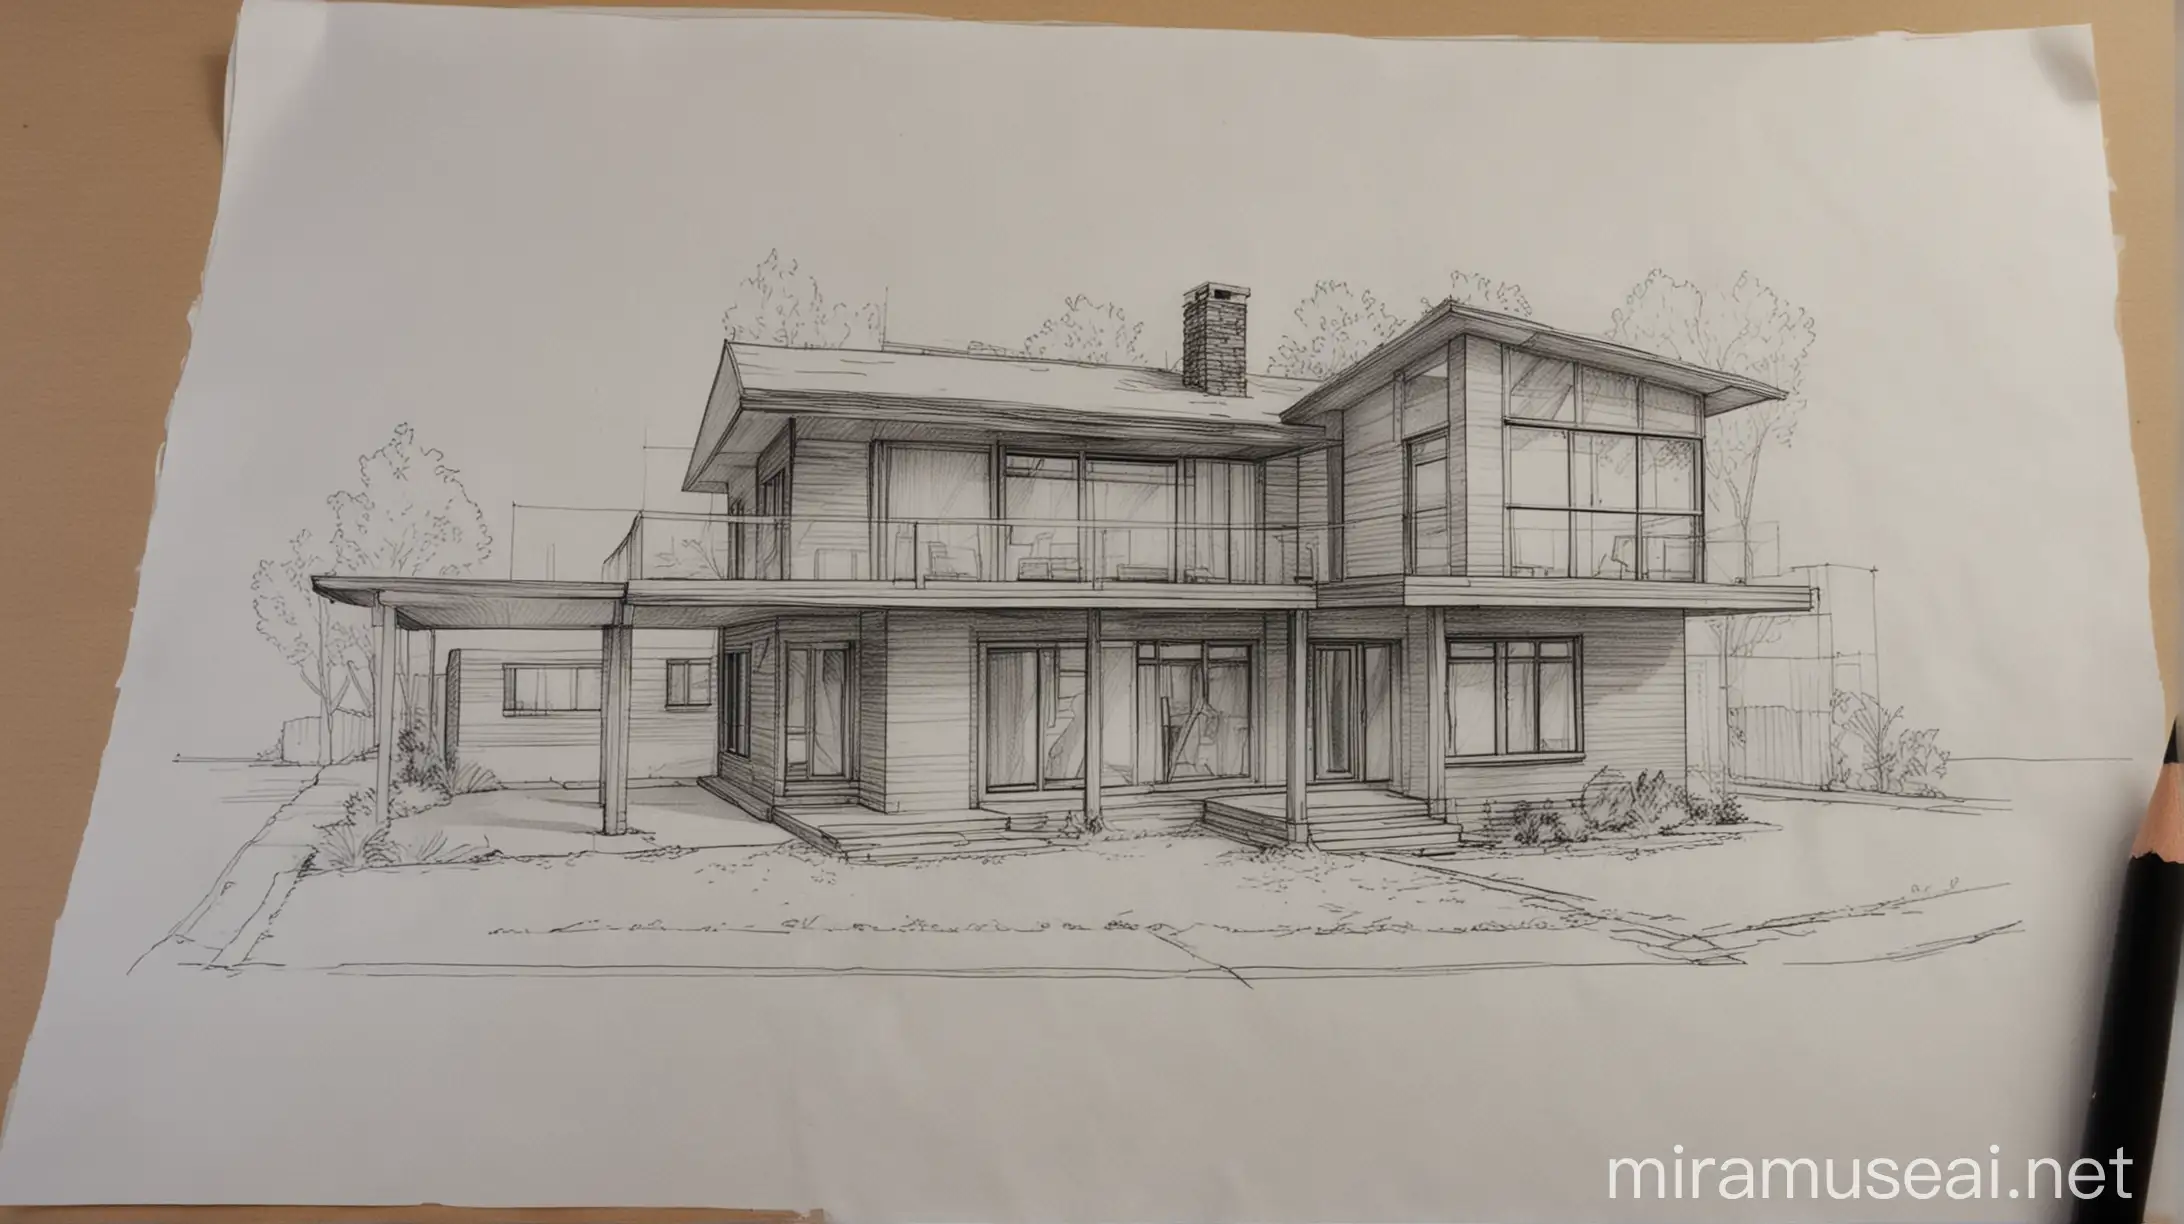 Architectural Sketch of TwoStory Glass House with Garage